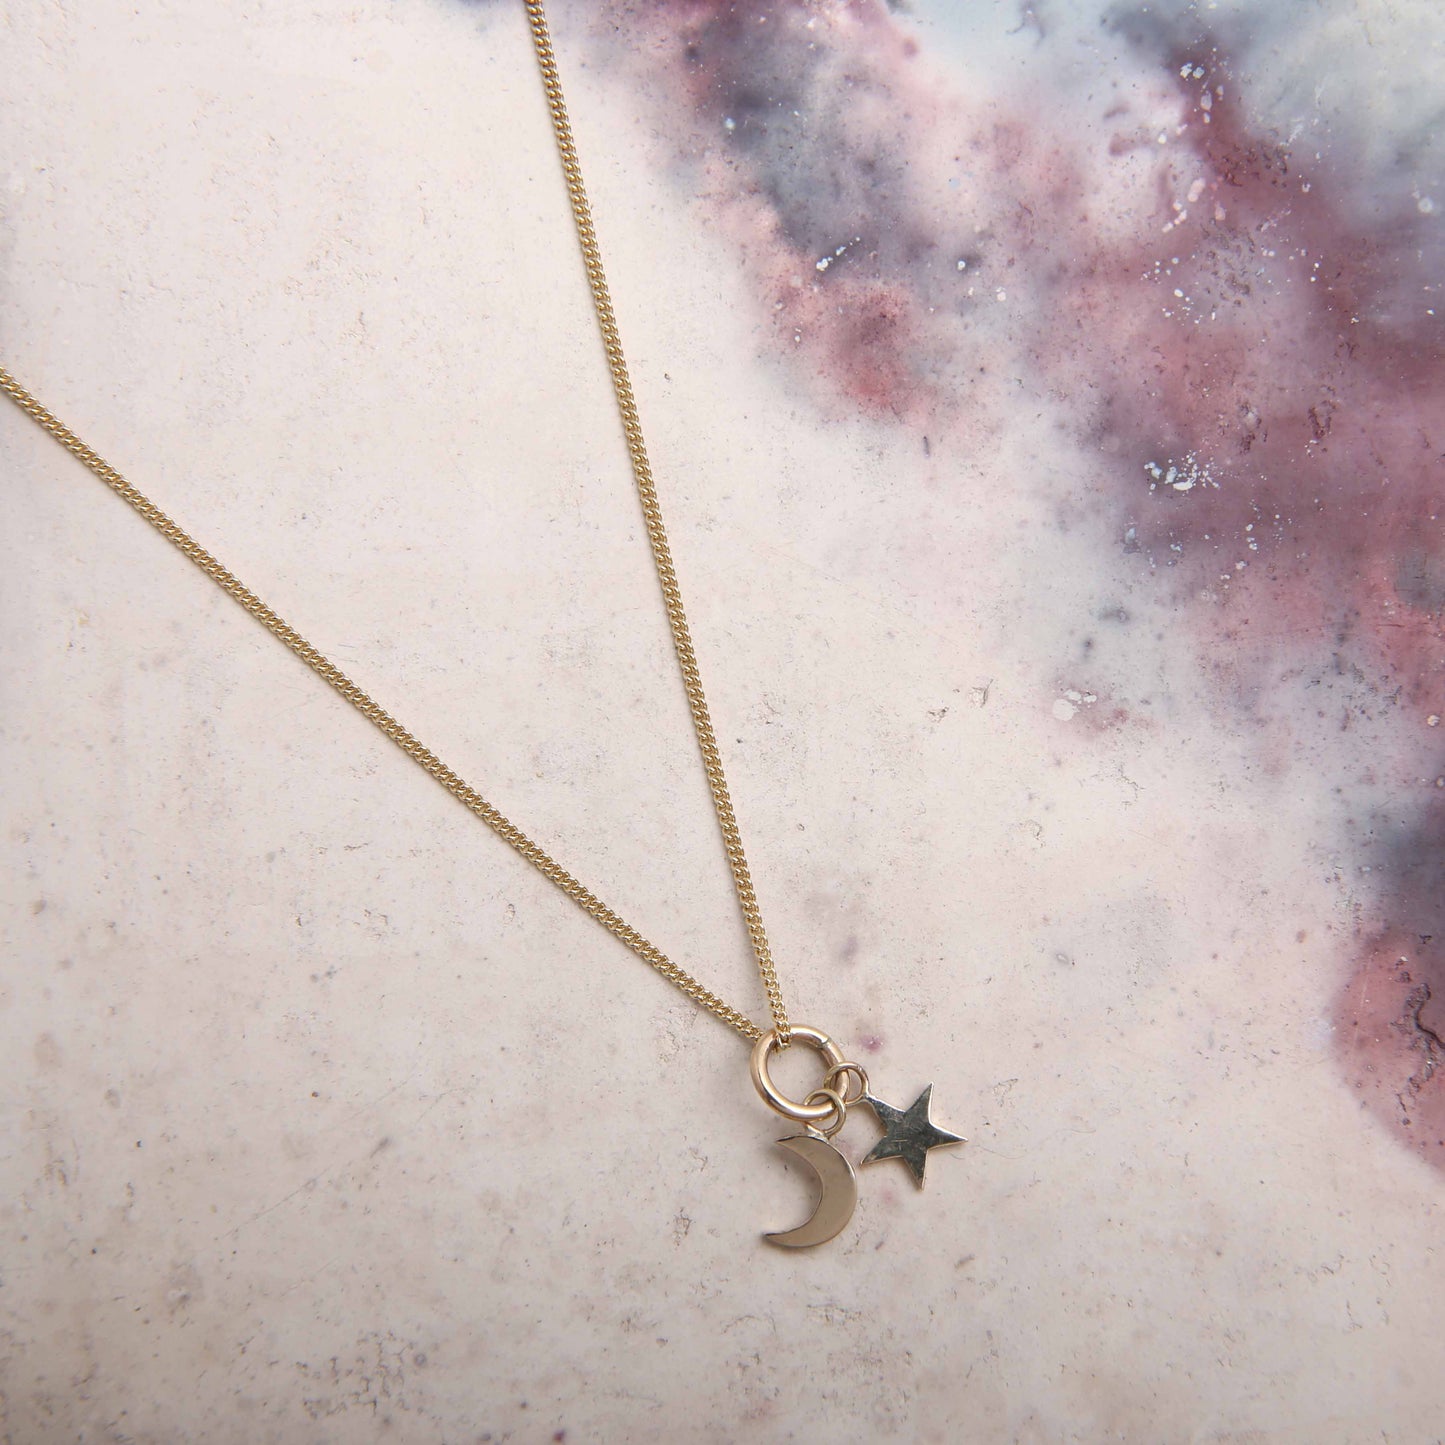 handmade gold moon and star pendant necklace on pink marbled background